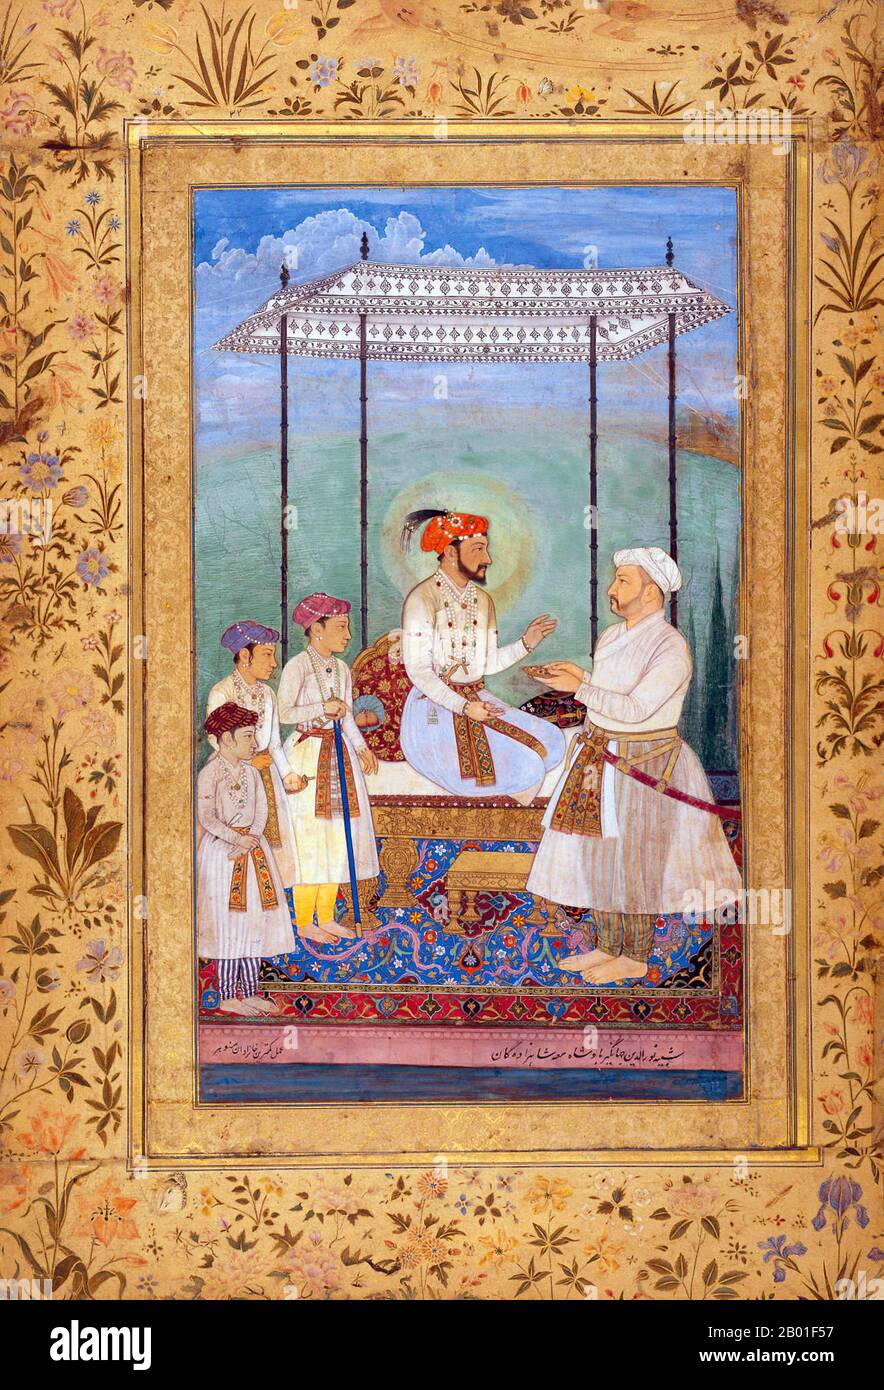 India: Shah Jahan (5 January 1592 - 22 January 1666) with his three sons, Dara Shikoh, Shah Shuja and Aurangzeb, their maternal grandfather Asaf Khan to the right. Miniature painting, c. 1628.  Shah Jahan was the emperor of the Mughal Empire in the Indian Subcontinent from 1628 until 1658. The name Shah Jahan comes from Persian meaning 'King of the World'. He was the fifth Mughal emperor after Babur, Humayun, Akbar, and Jahangir.  The period of his reign was the golden age of Mughal architecture. Shah Jahan erected many splendid monuments, the most famous of which is the legendary Taj Mahal. Stock Photo